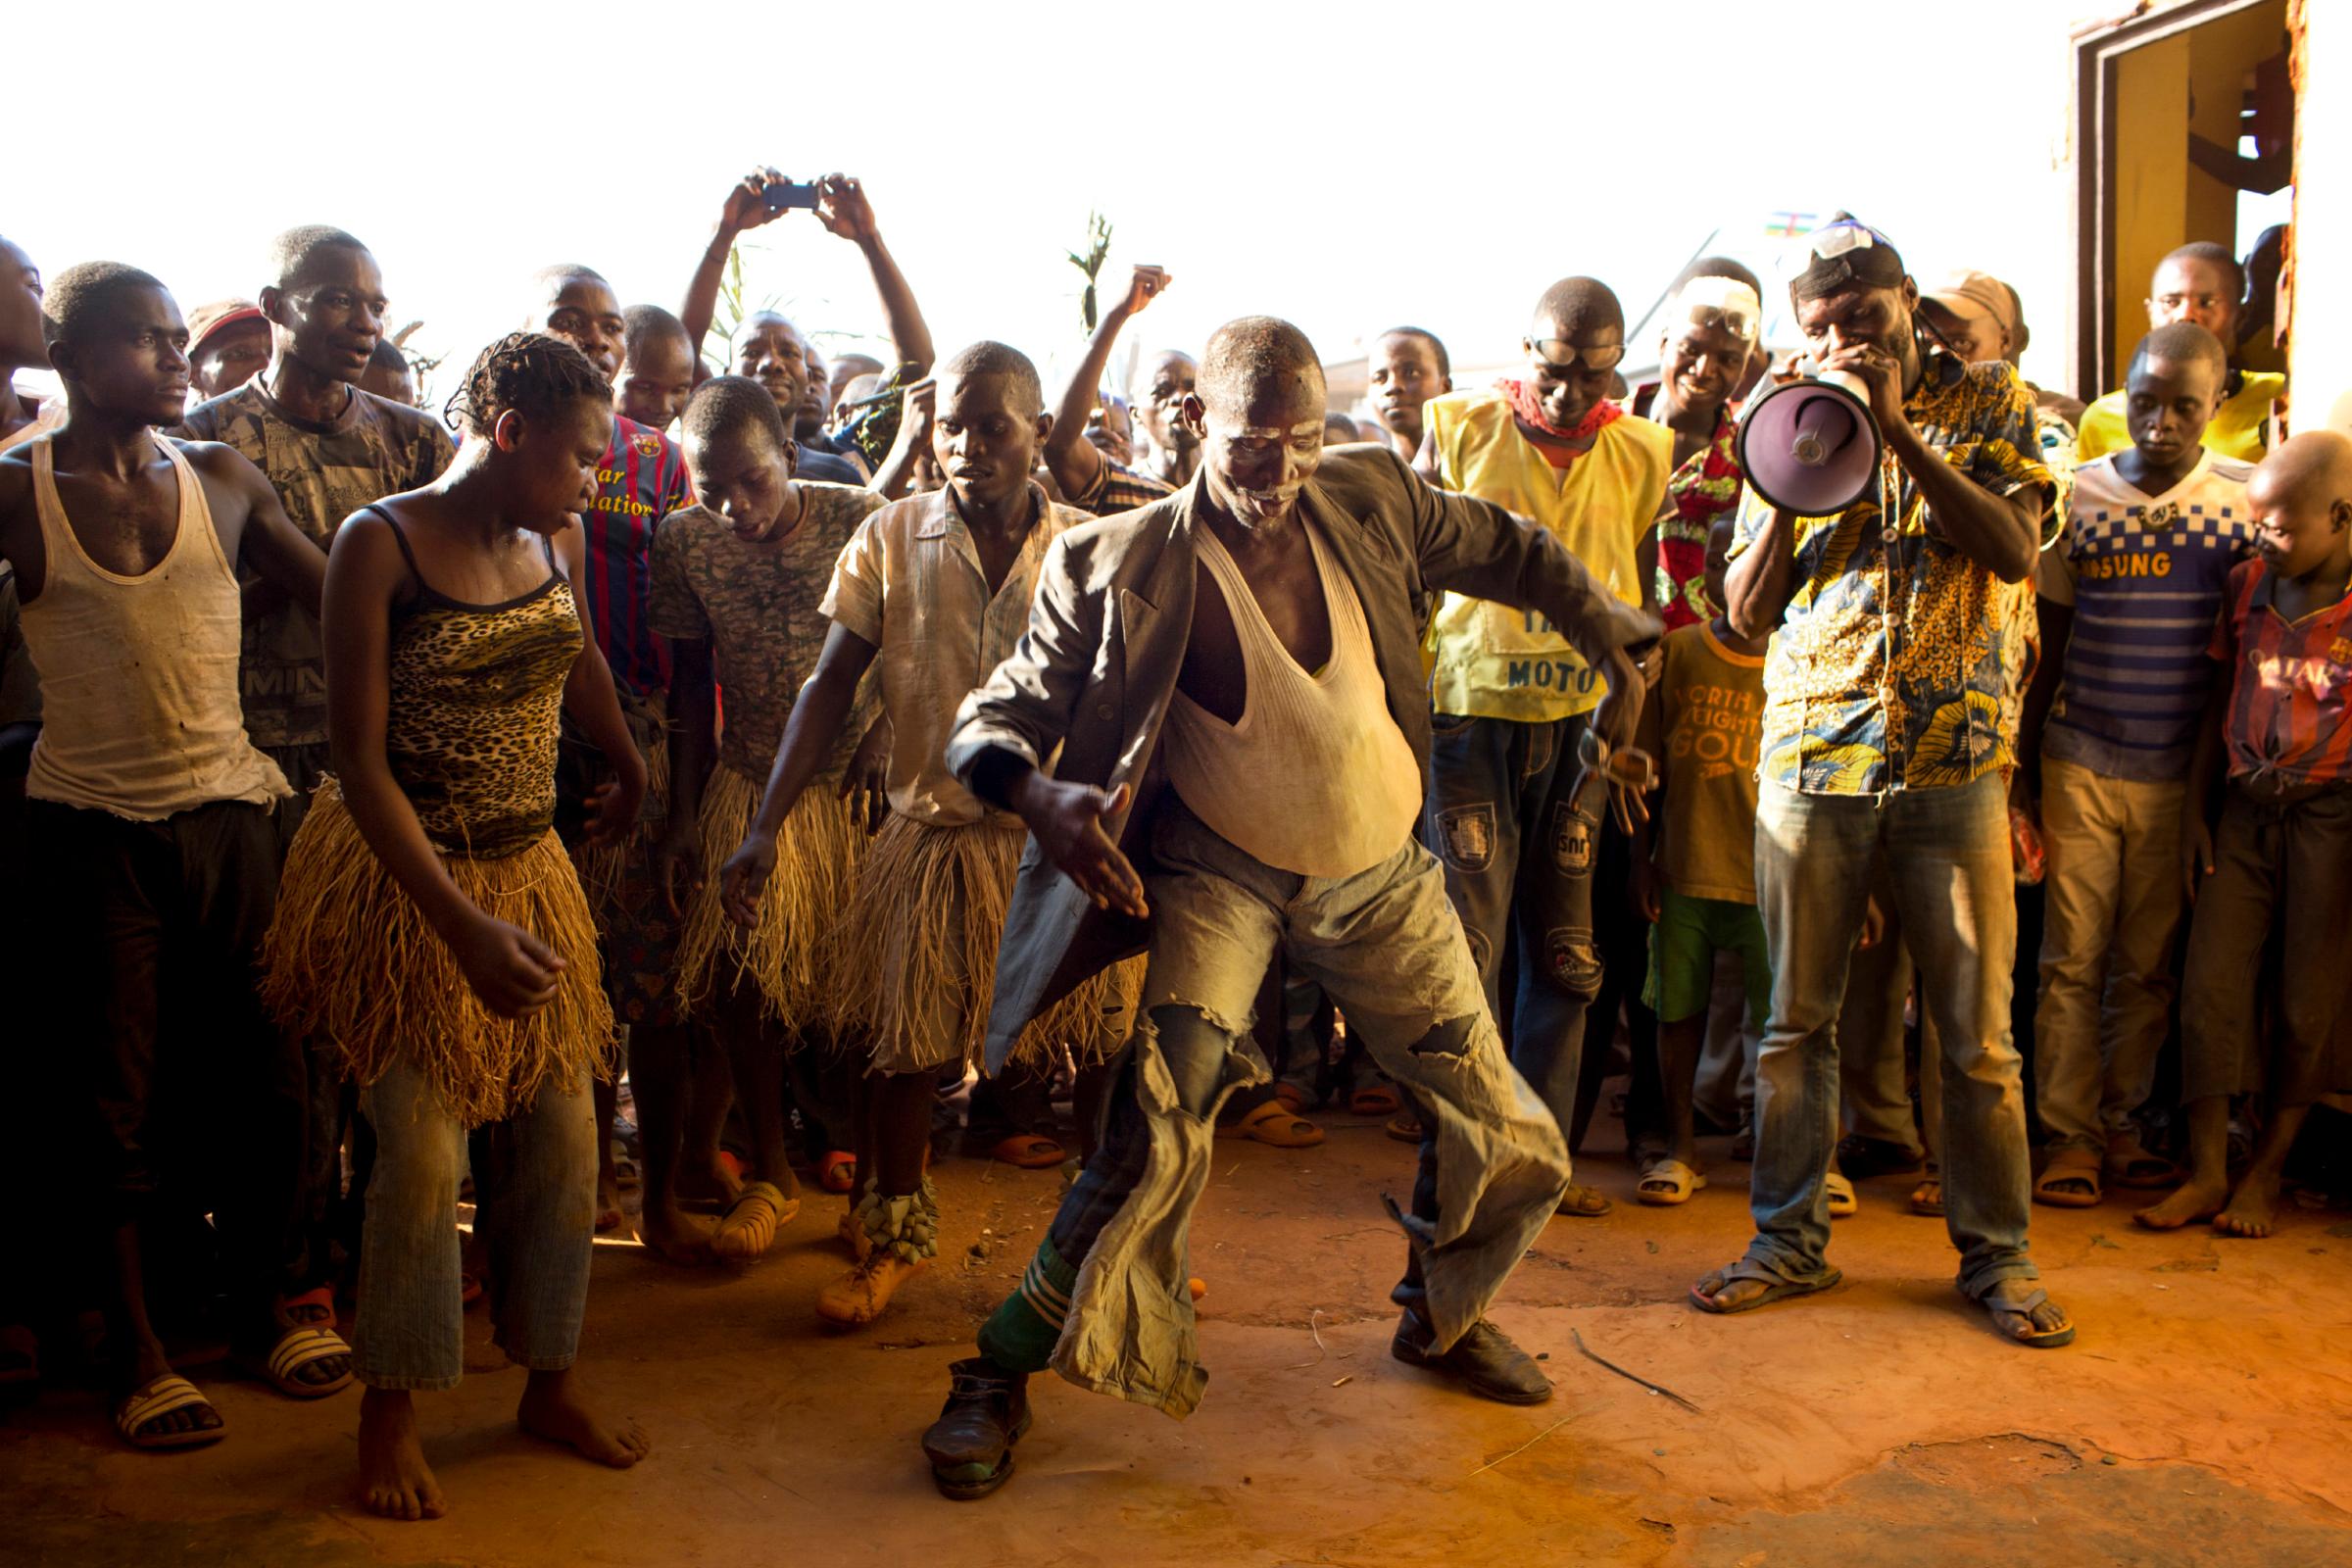 A man disguised as pregnant woman dances to welcome candidate Anicet Georges Dologuelé, who is running for president, at the aerodome in Mobaye, Central African Republic, Dec. 20, 2015.